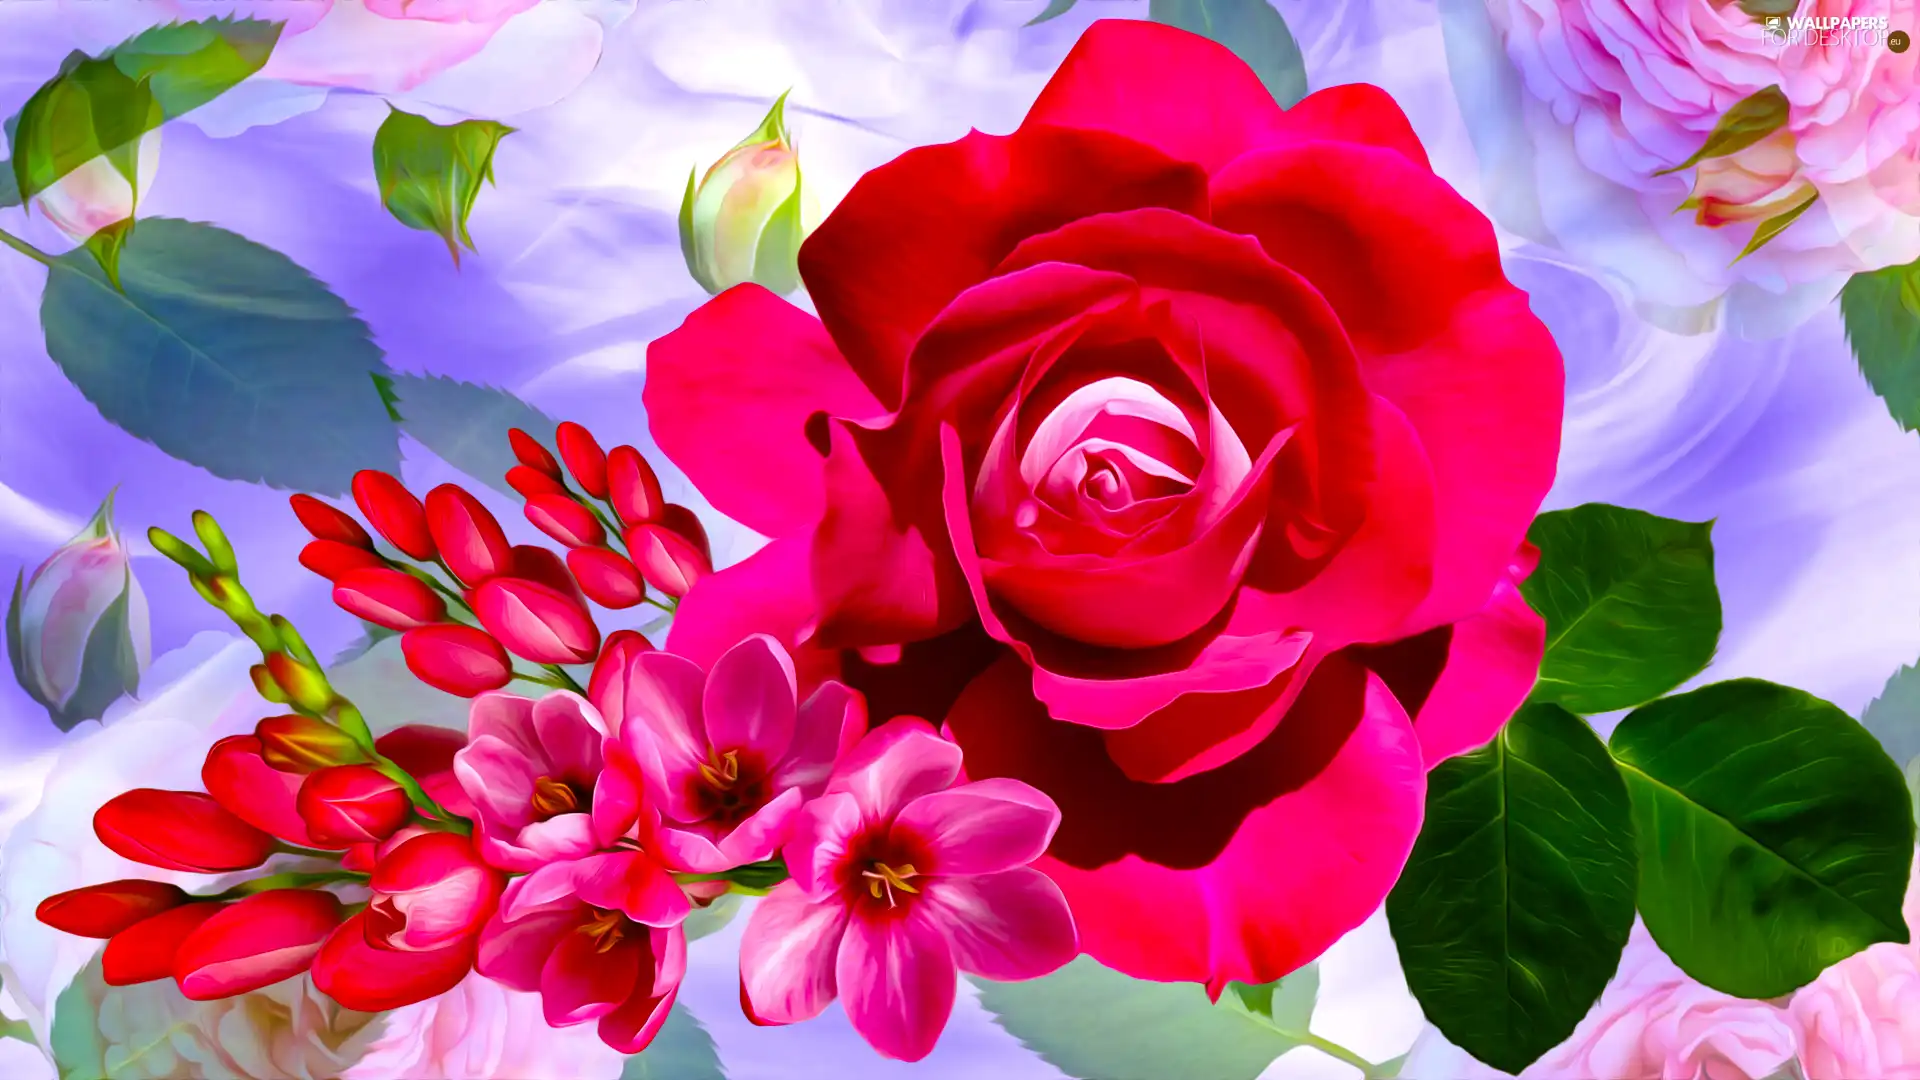 rose, graphics, Flowers, Freesias, Red